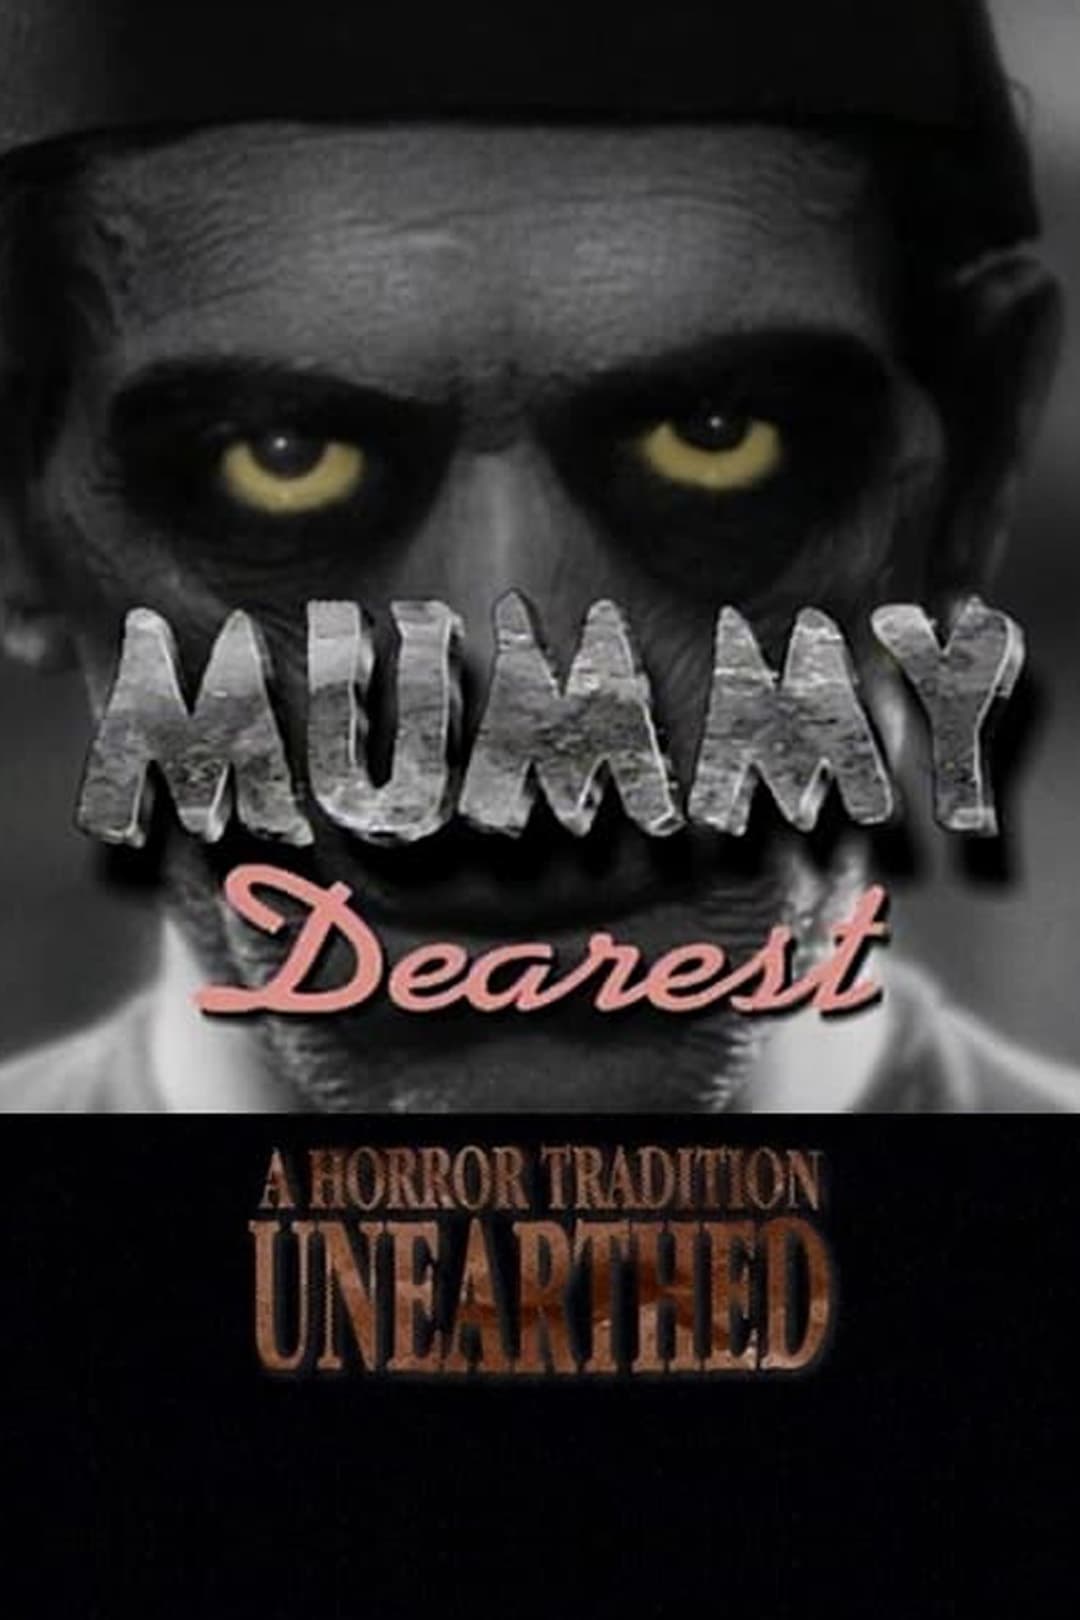 Mummy Dearest: A Horror Tradition Unearthed (2000)